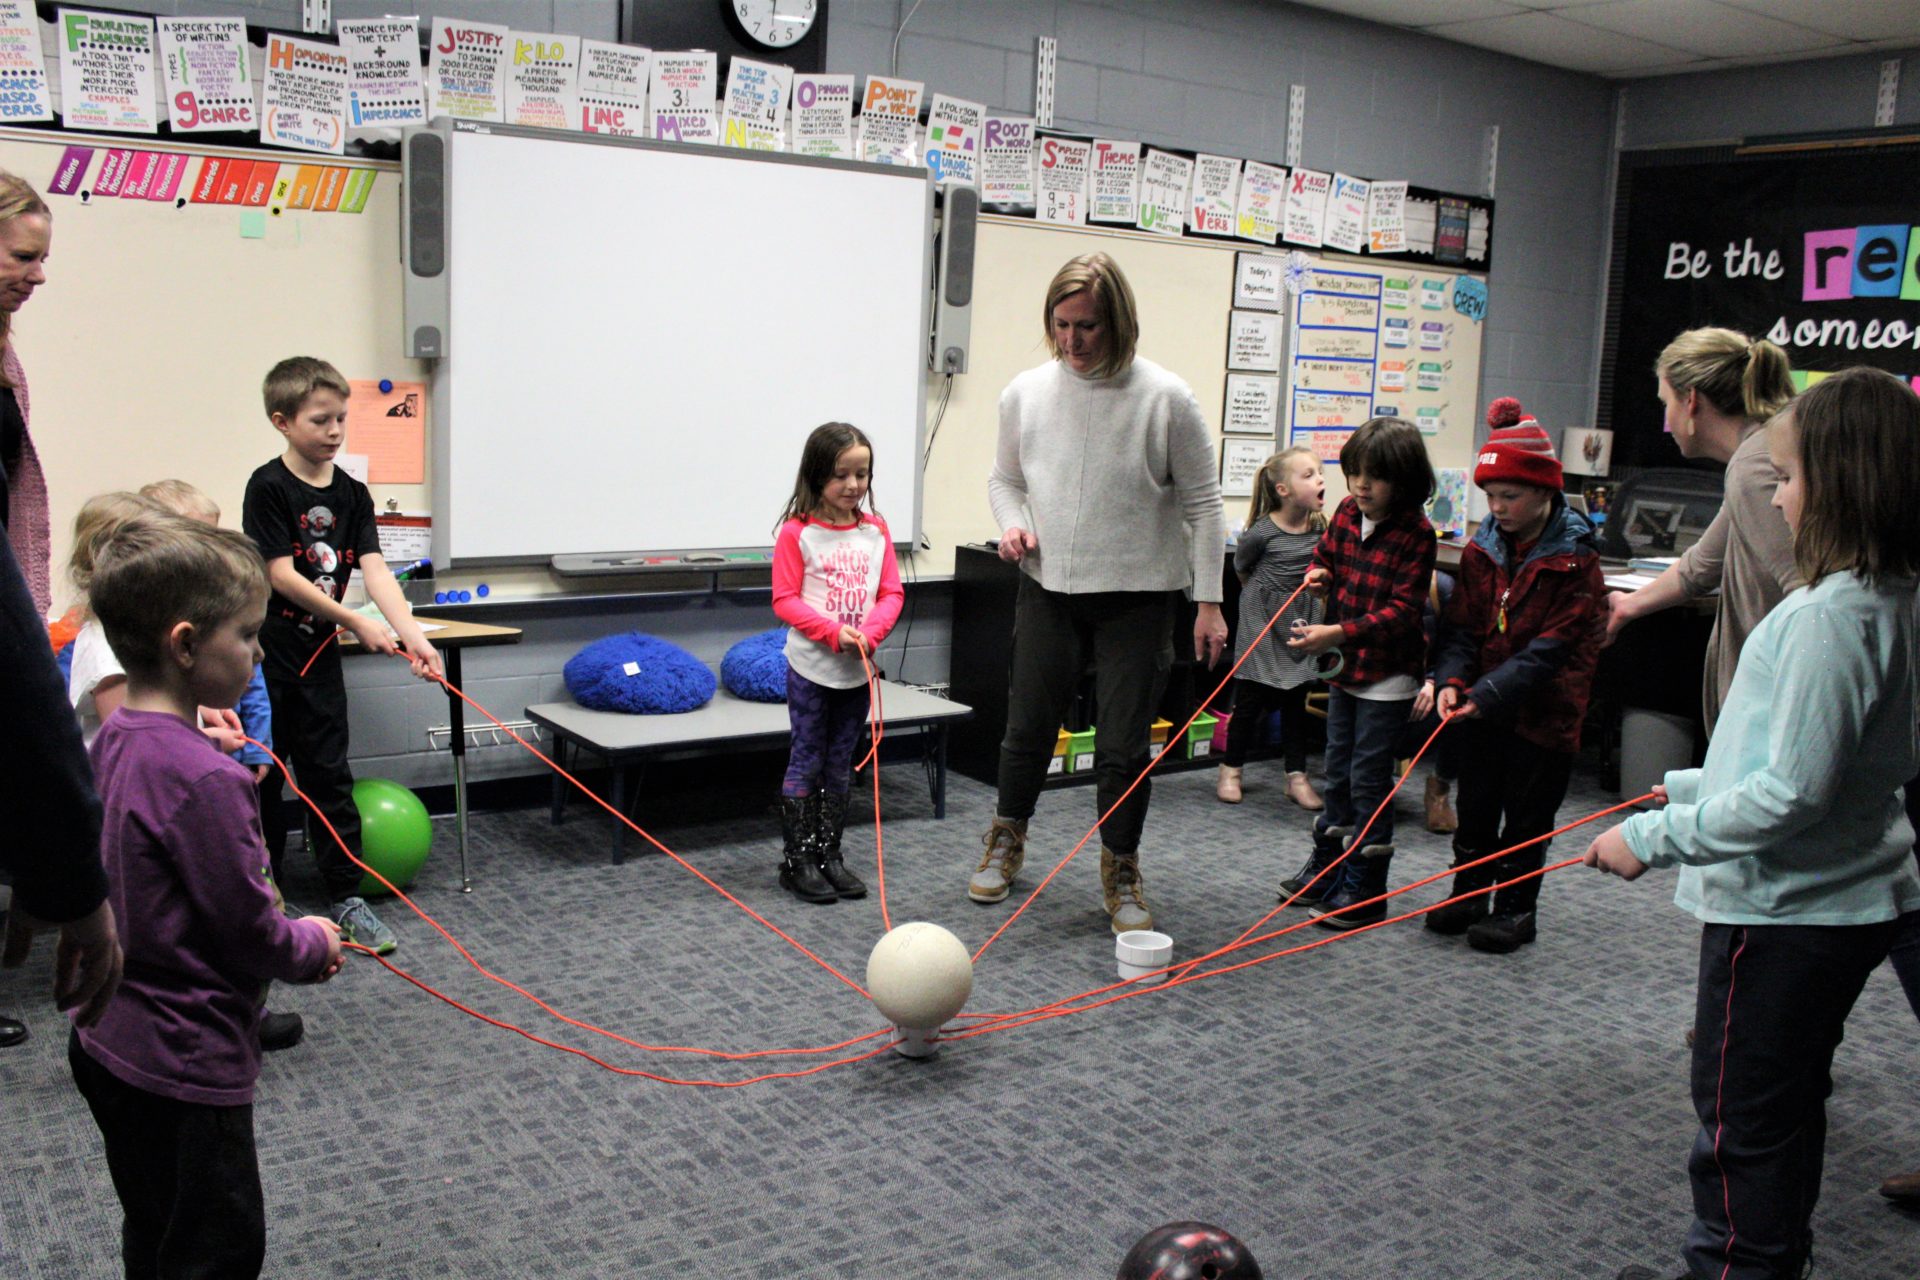 A group of students and adults try to lift a ball with string.